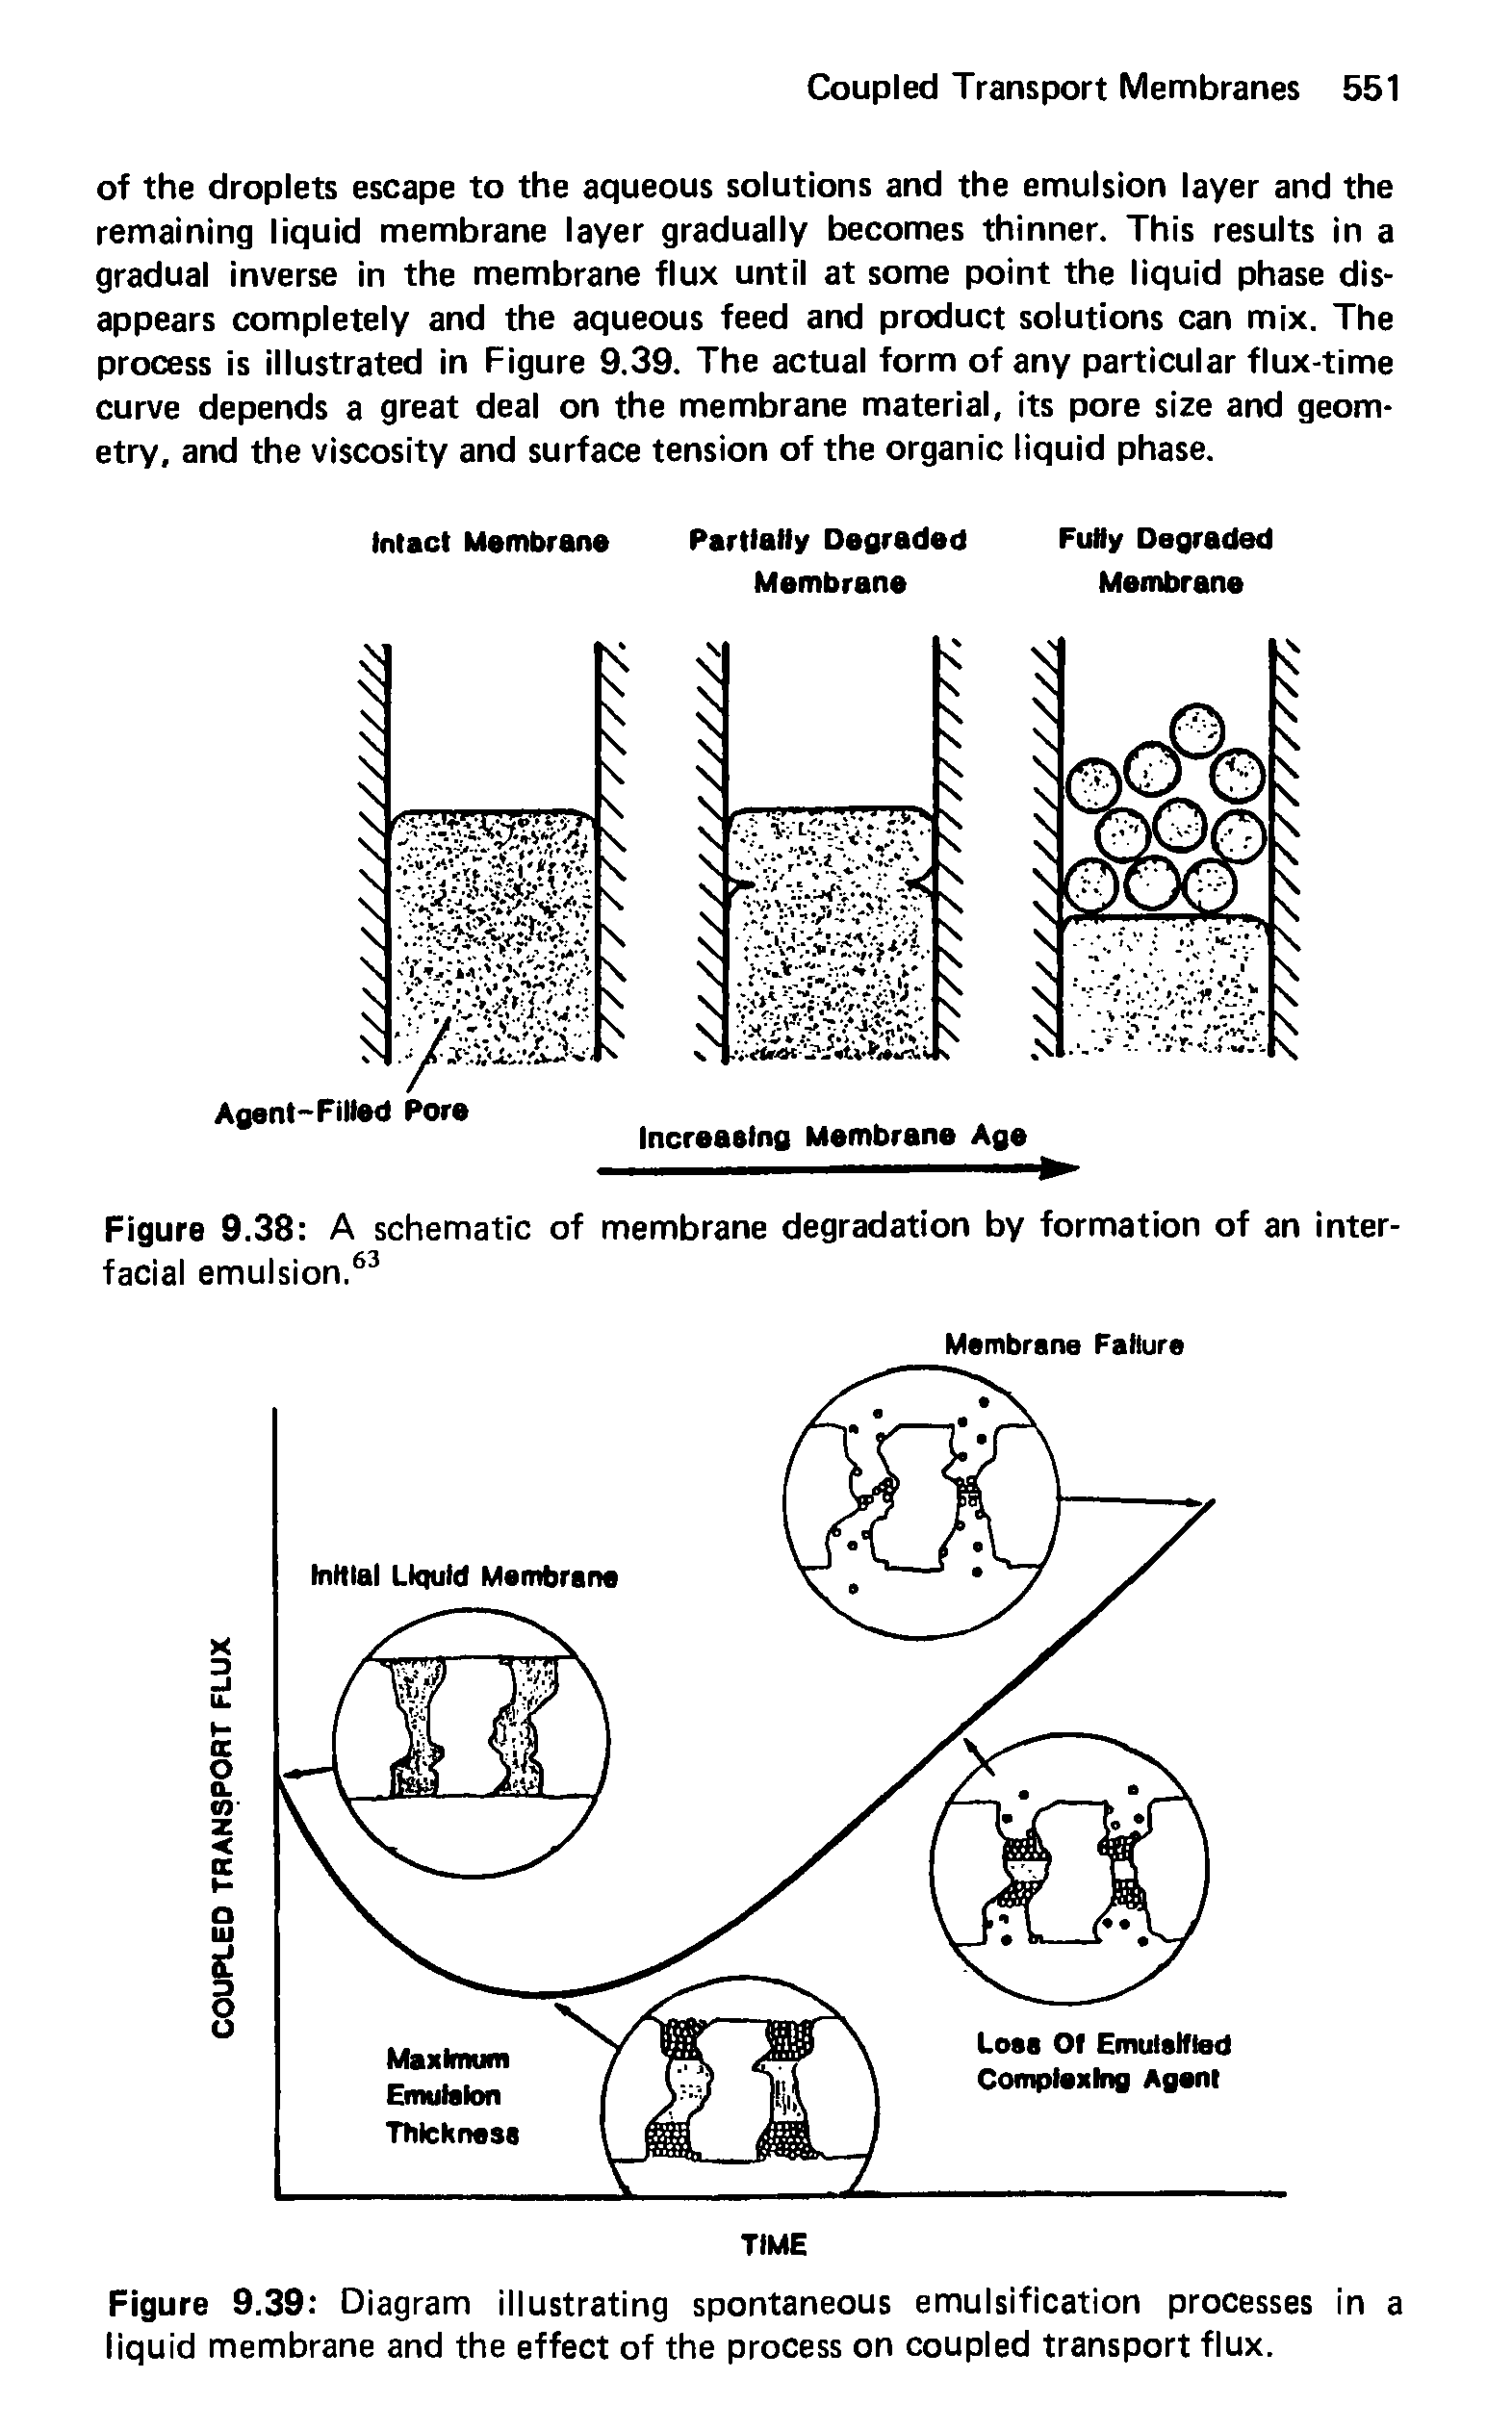 Figure 9.39 Diagram illustrating spontaneous emulsification processes in a liquid membrane and the effect of the process on coupled transport flux.